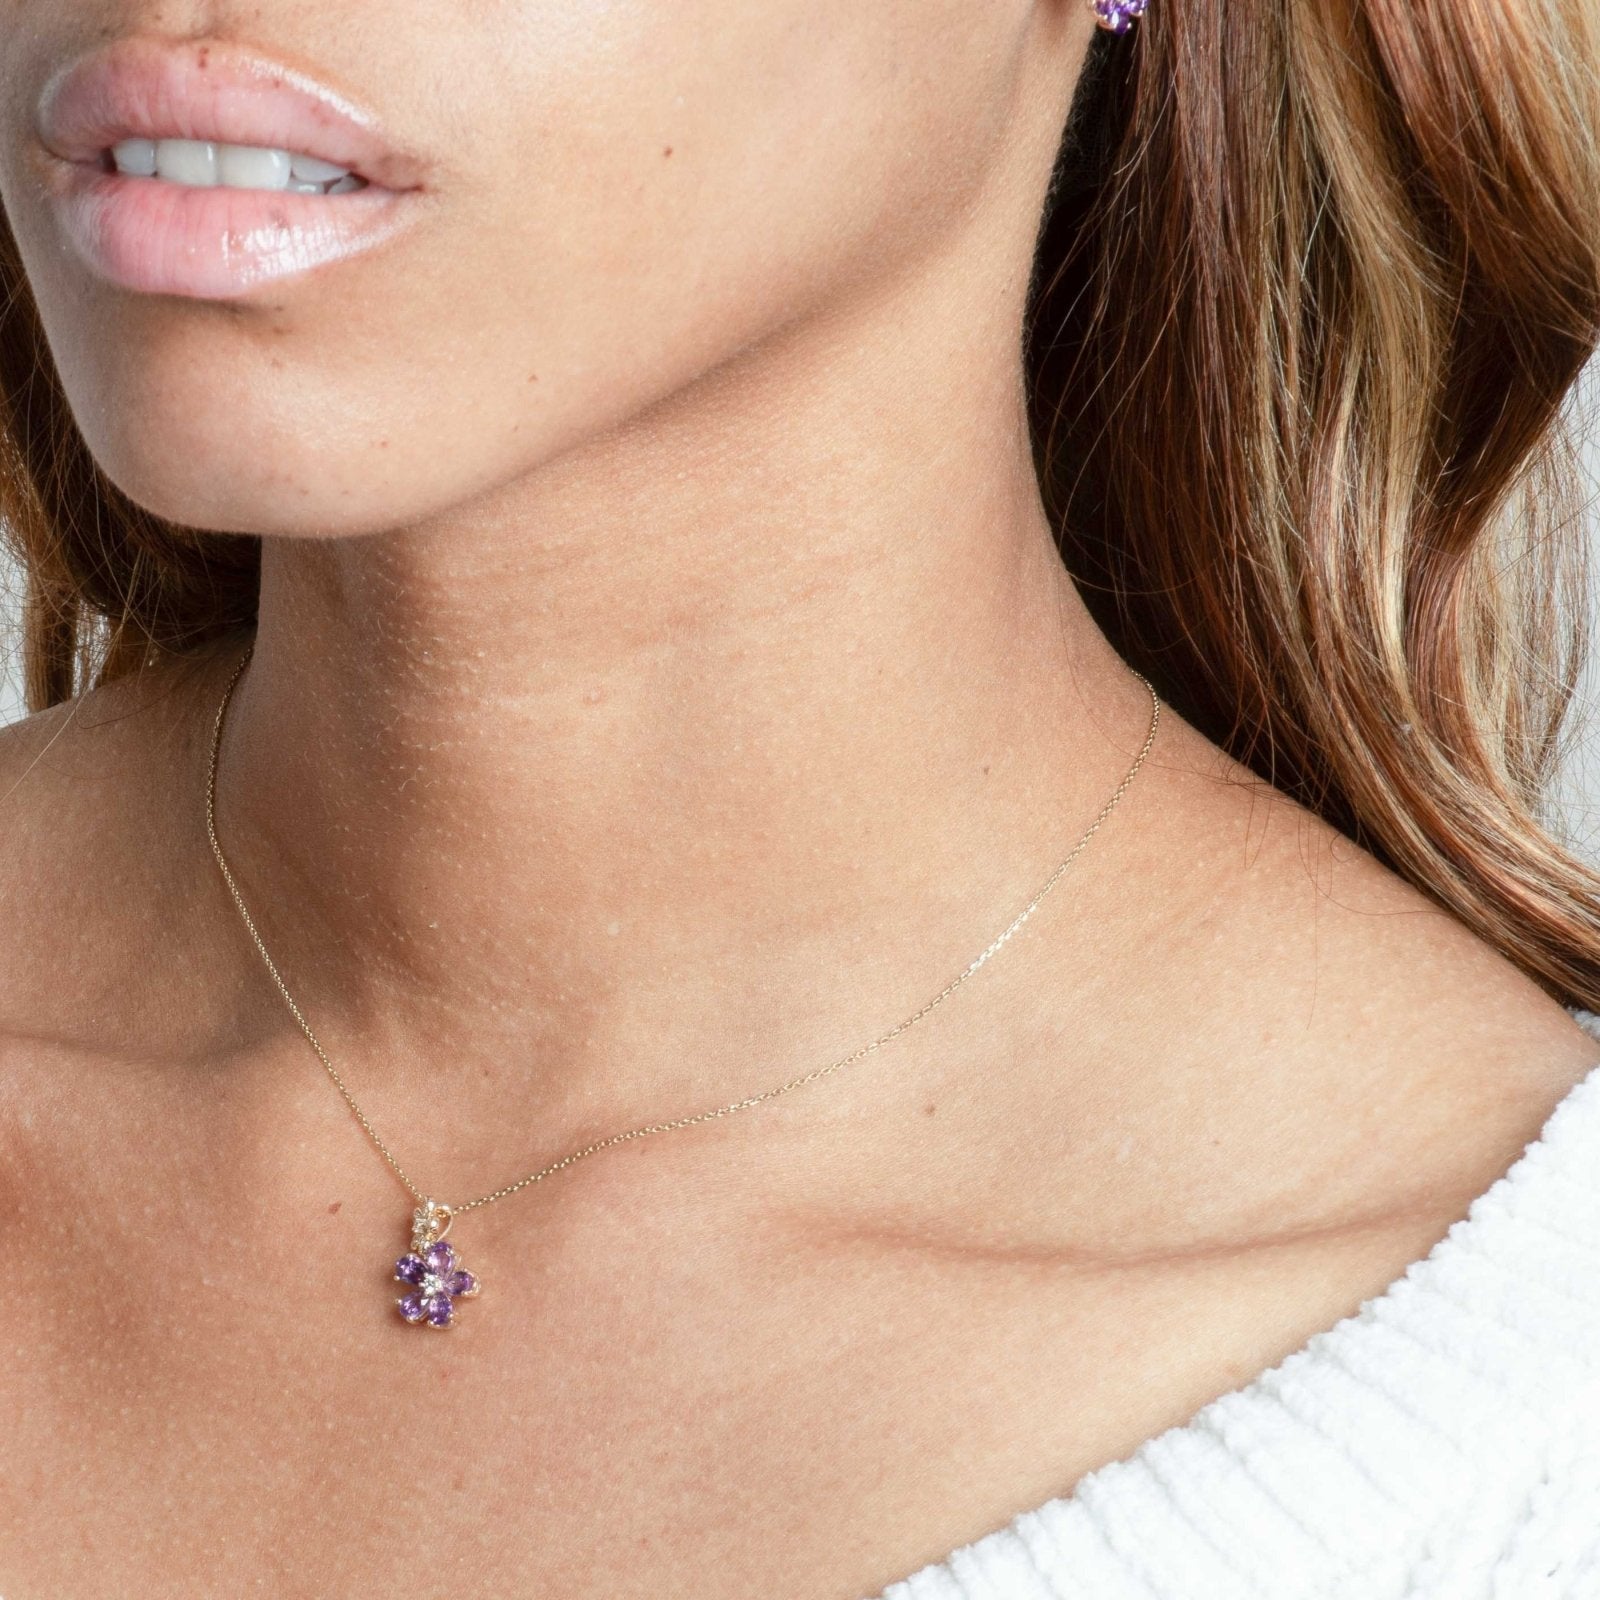 Double Flower Drop Pendant in Amethyst and White Sapphire Necklaces Estella Collection #product_description# 32733 10k Amethyst Birthstone #tag4# #tag5# #tag6# #tag7# #tag8# #tag9# #tag10#